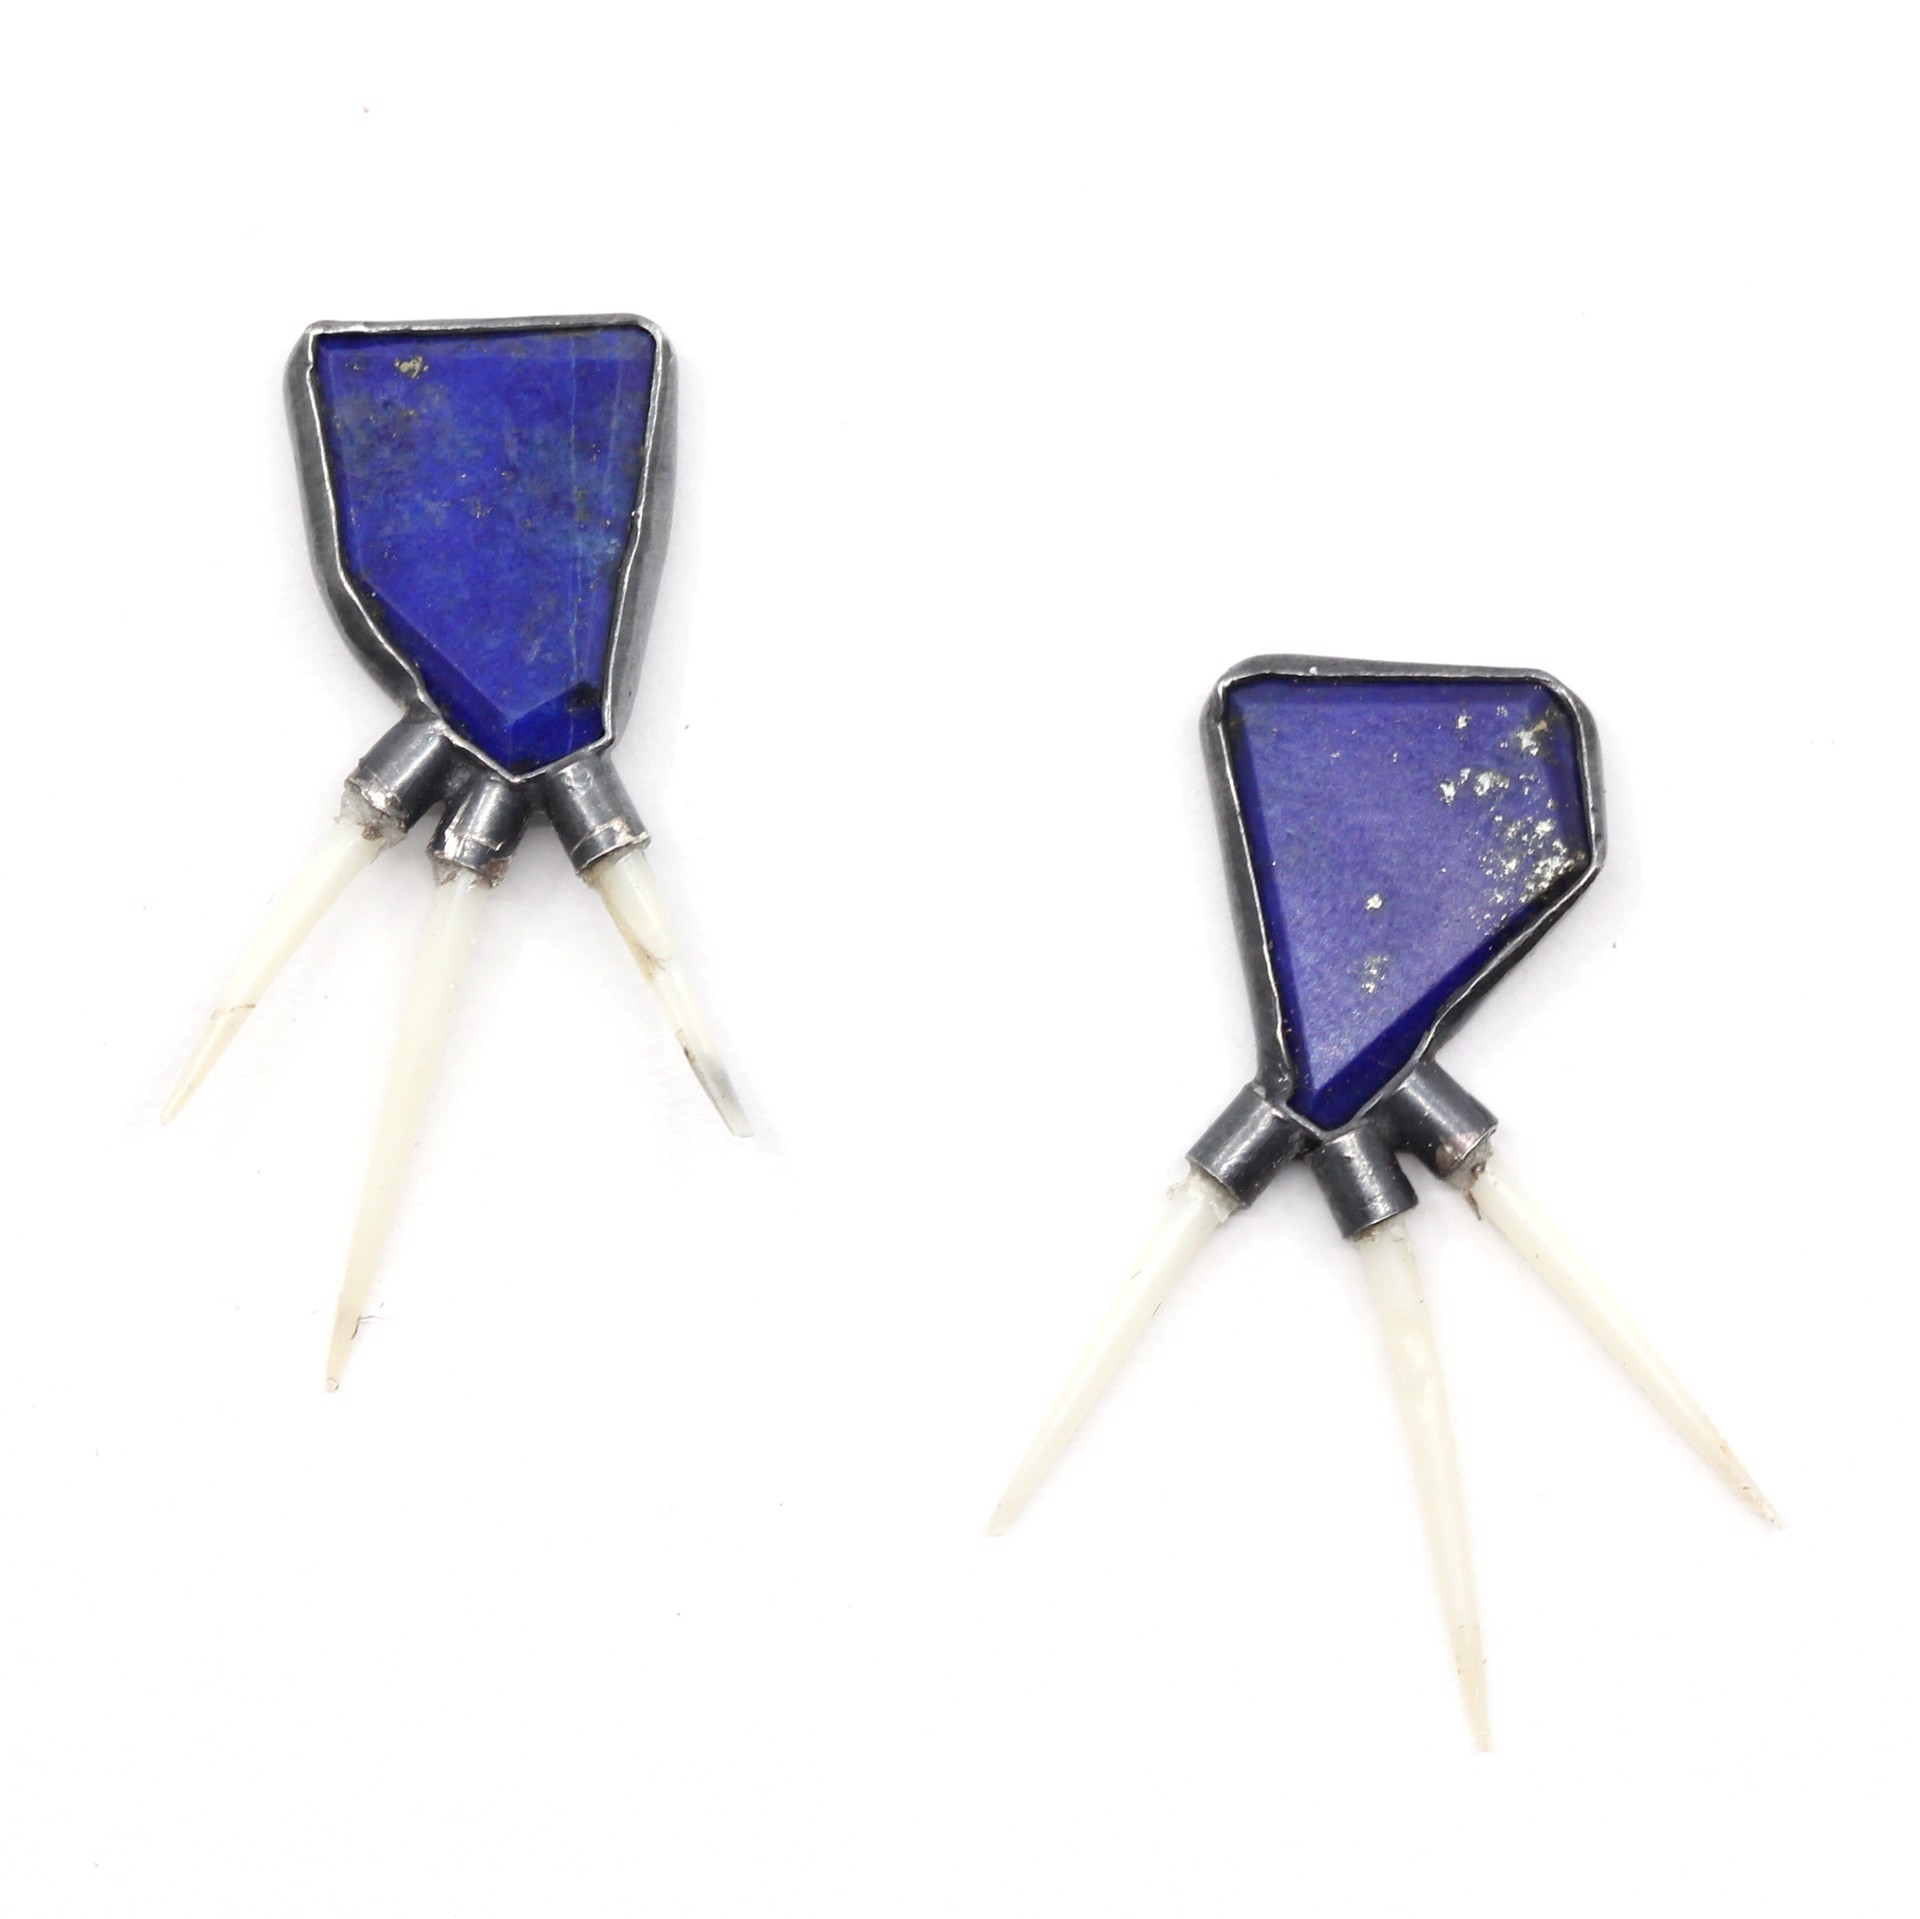 Lapis Spine Earrings by Anna Johnson